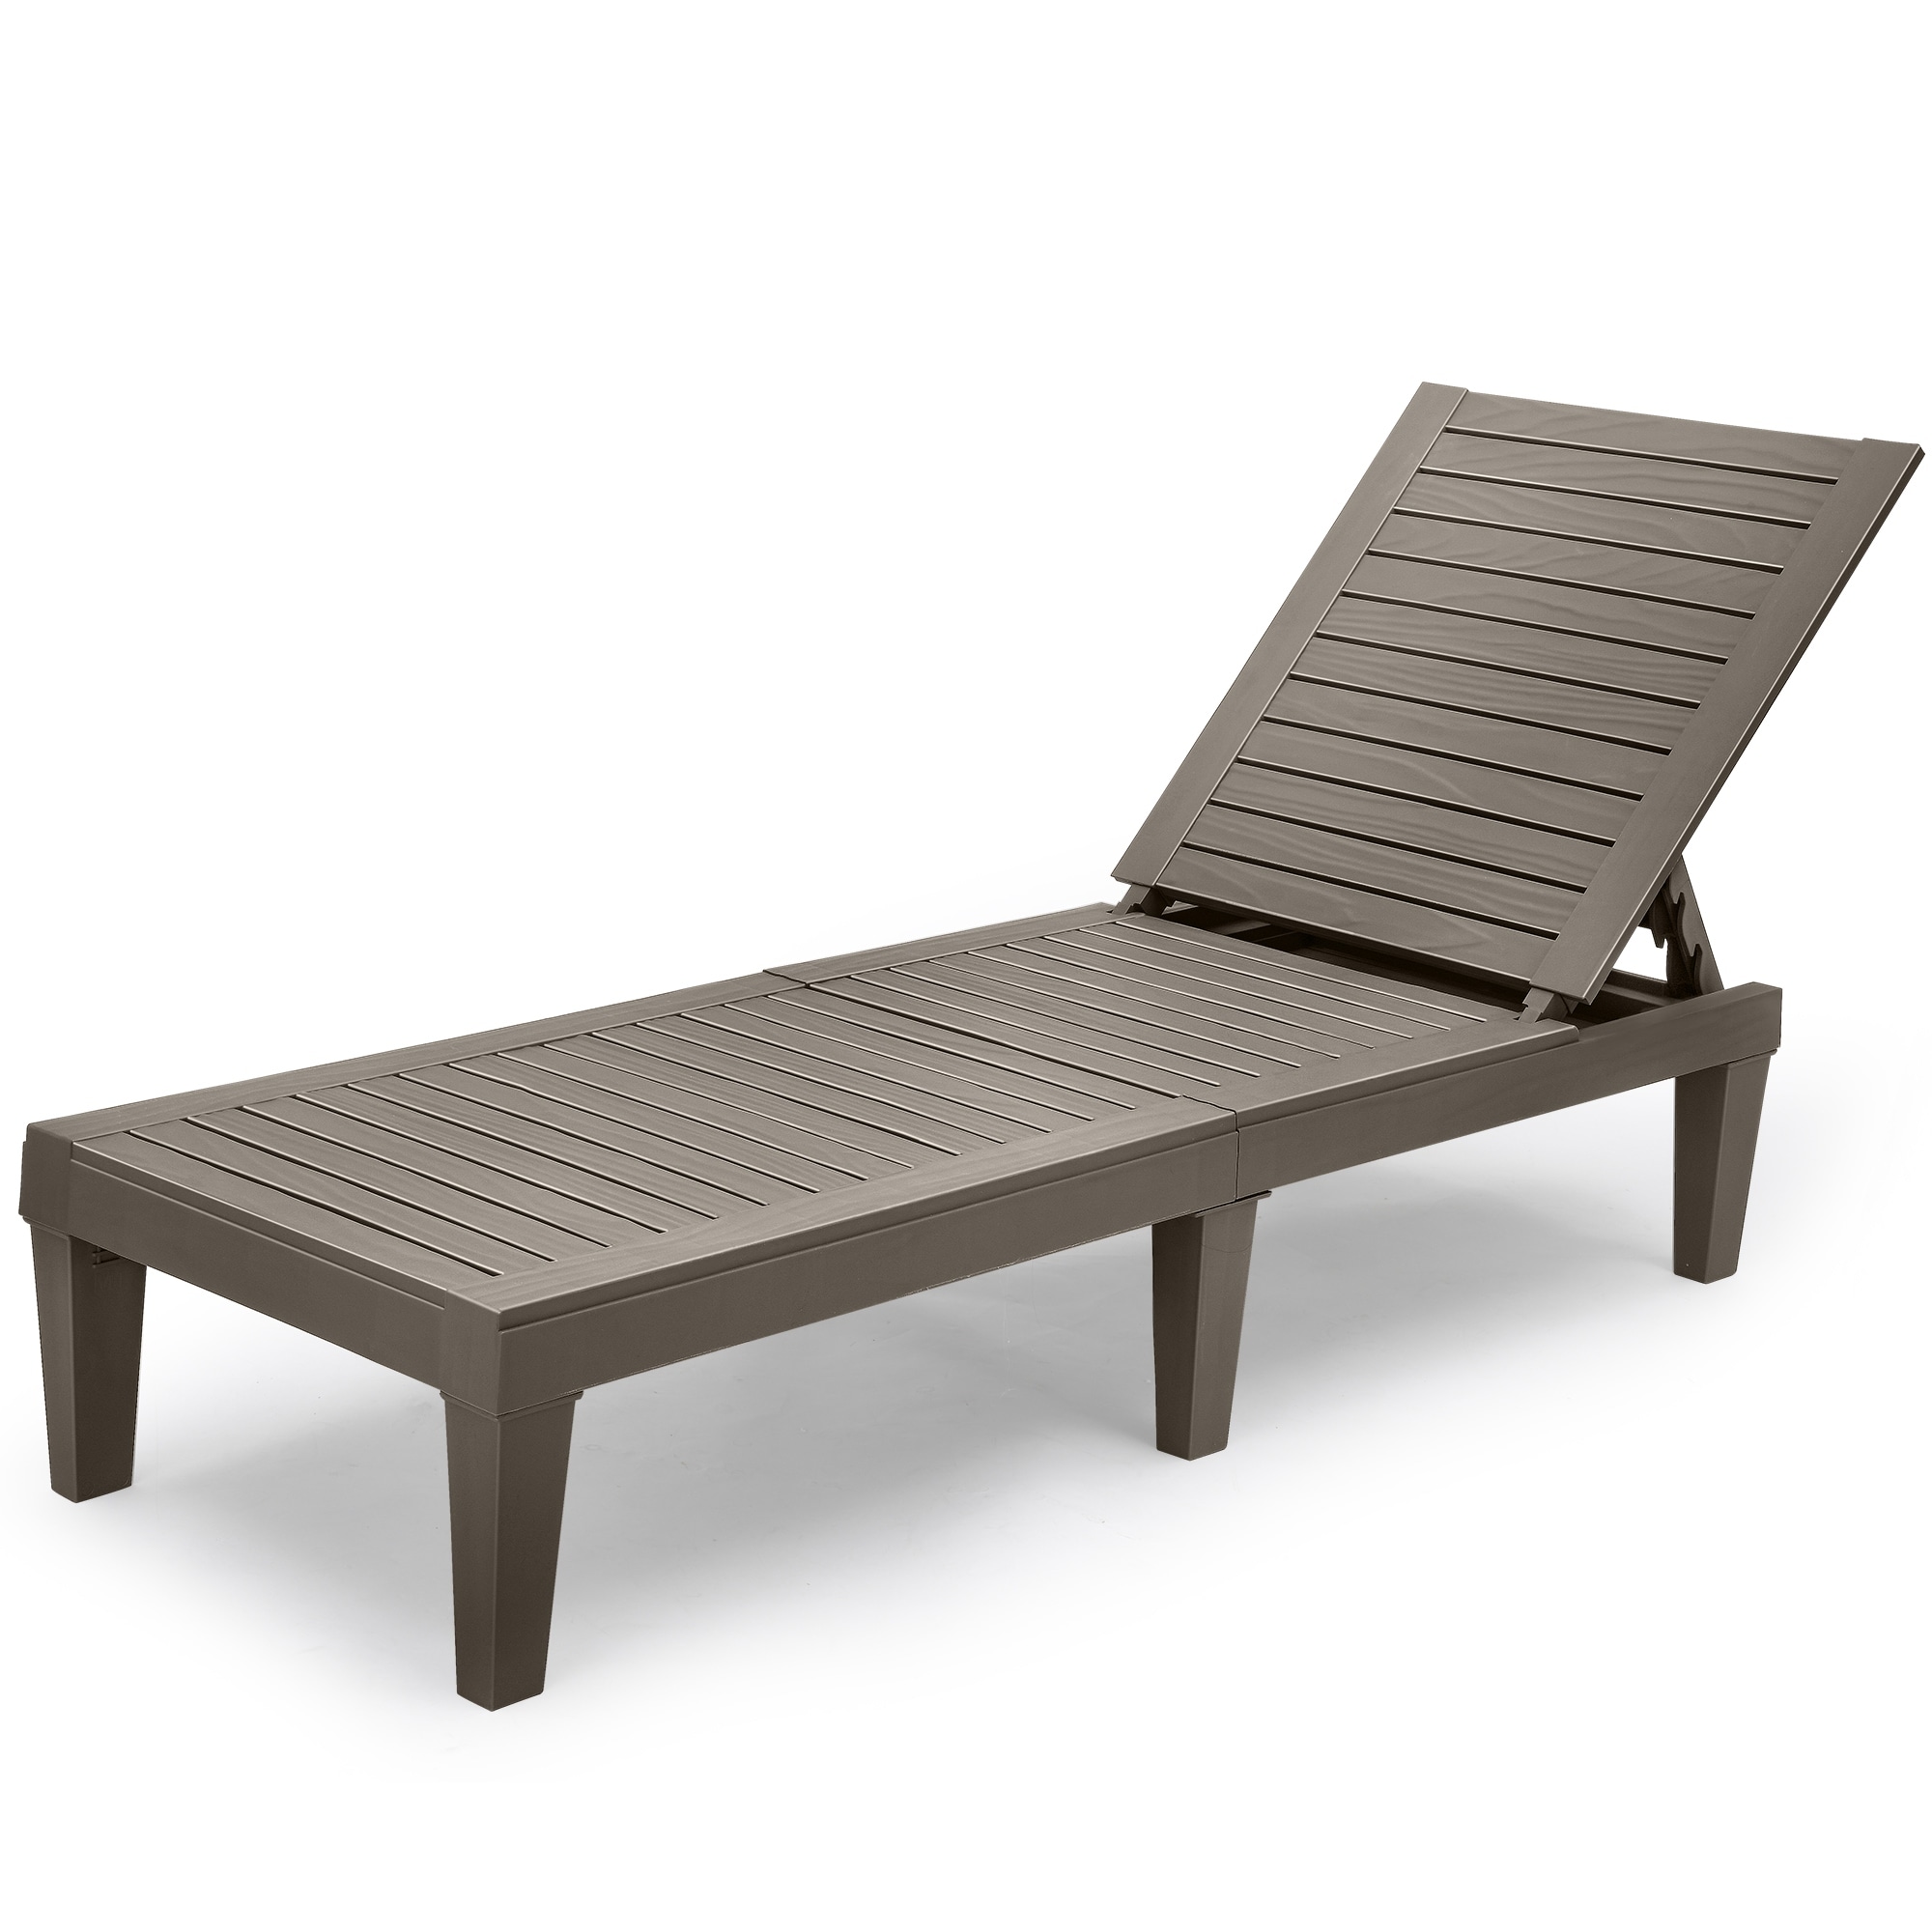 74.5 Reclining Single Outdoor Lounge Chairs - N/a